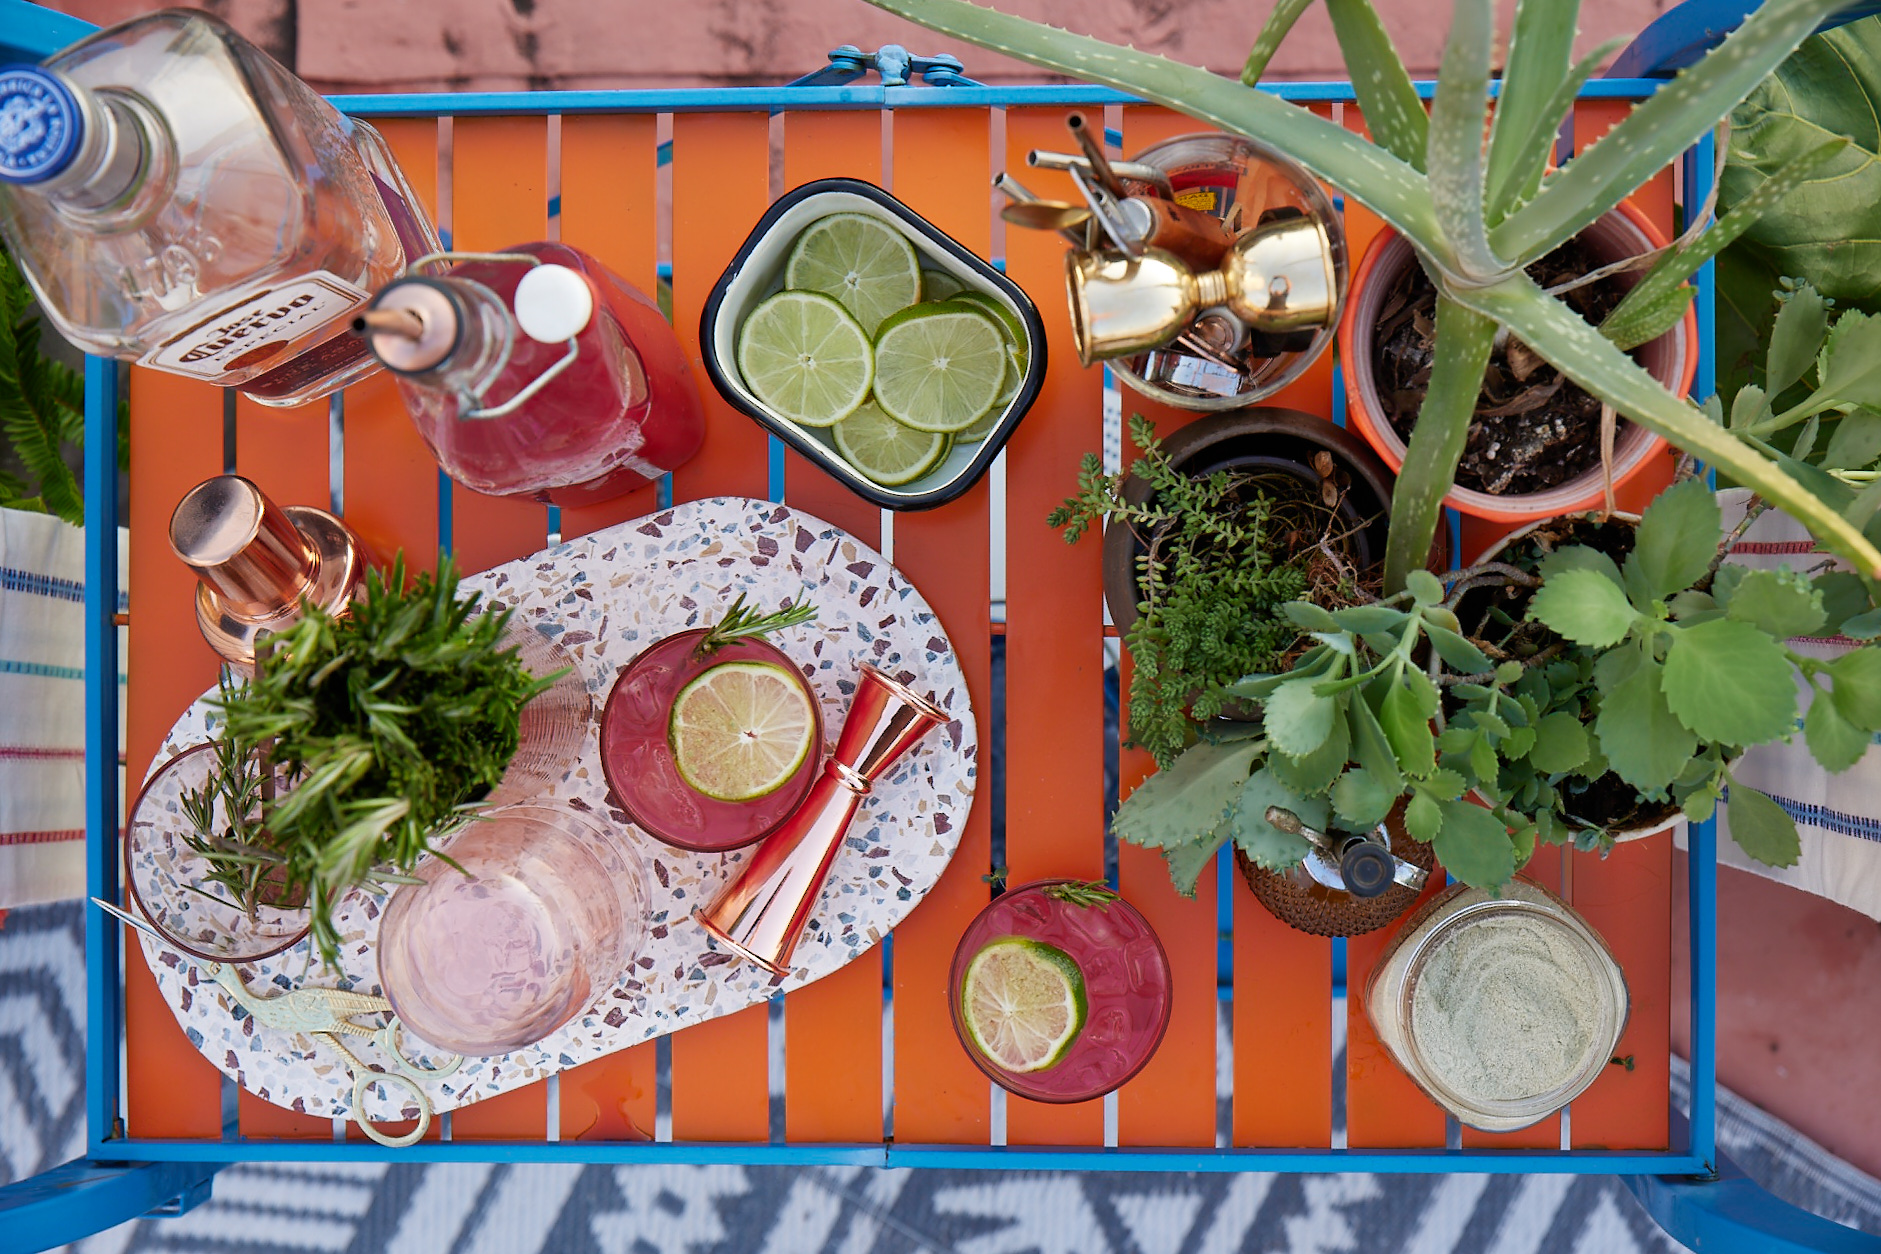 an arial shot of an orange slatted bar cart with a premixed cocktail a bottle of tequila, lime and herb garnish and several smaller potted plants